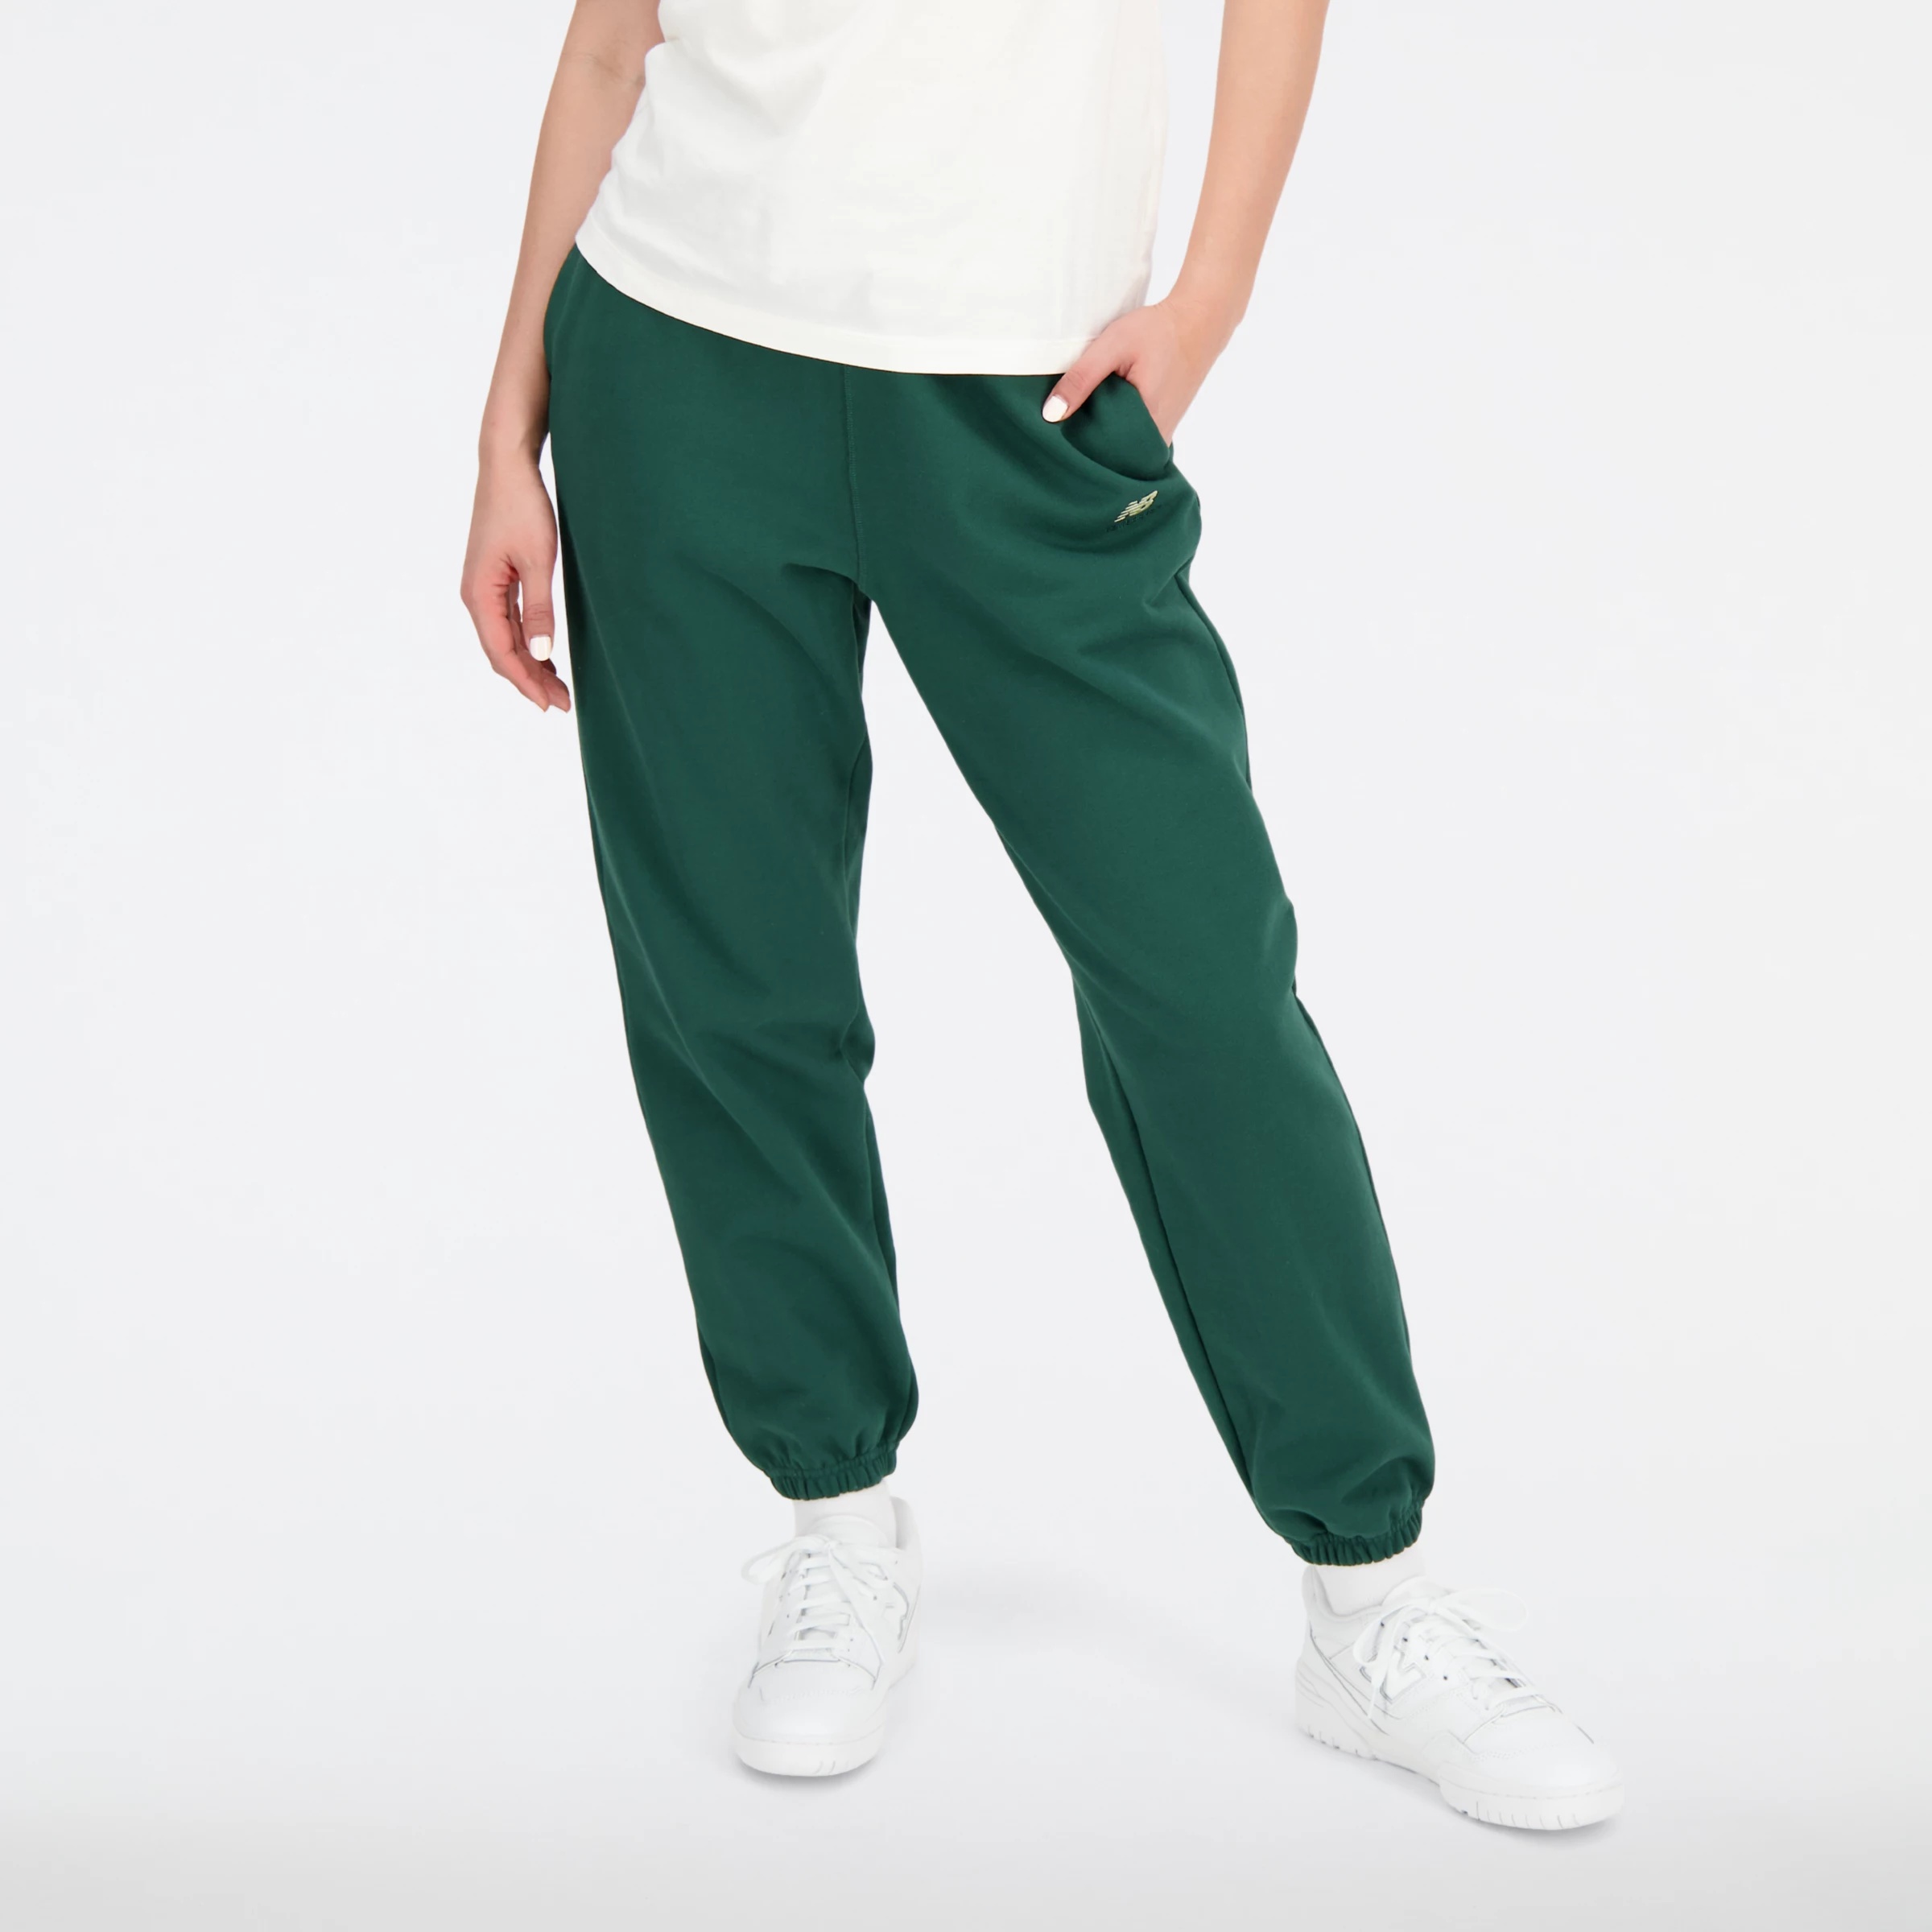 New Balance Athletics Remastered French Terry Pant